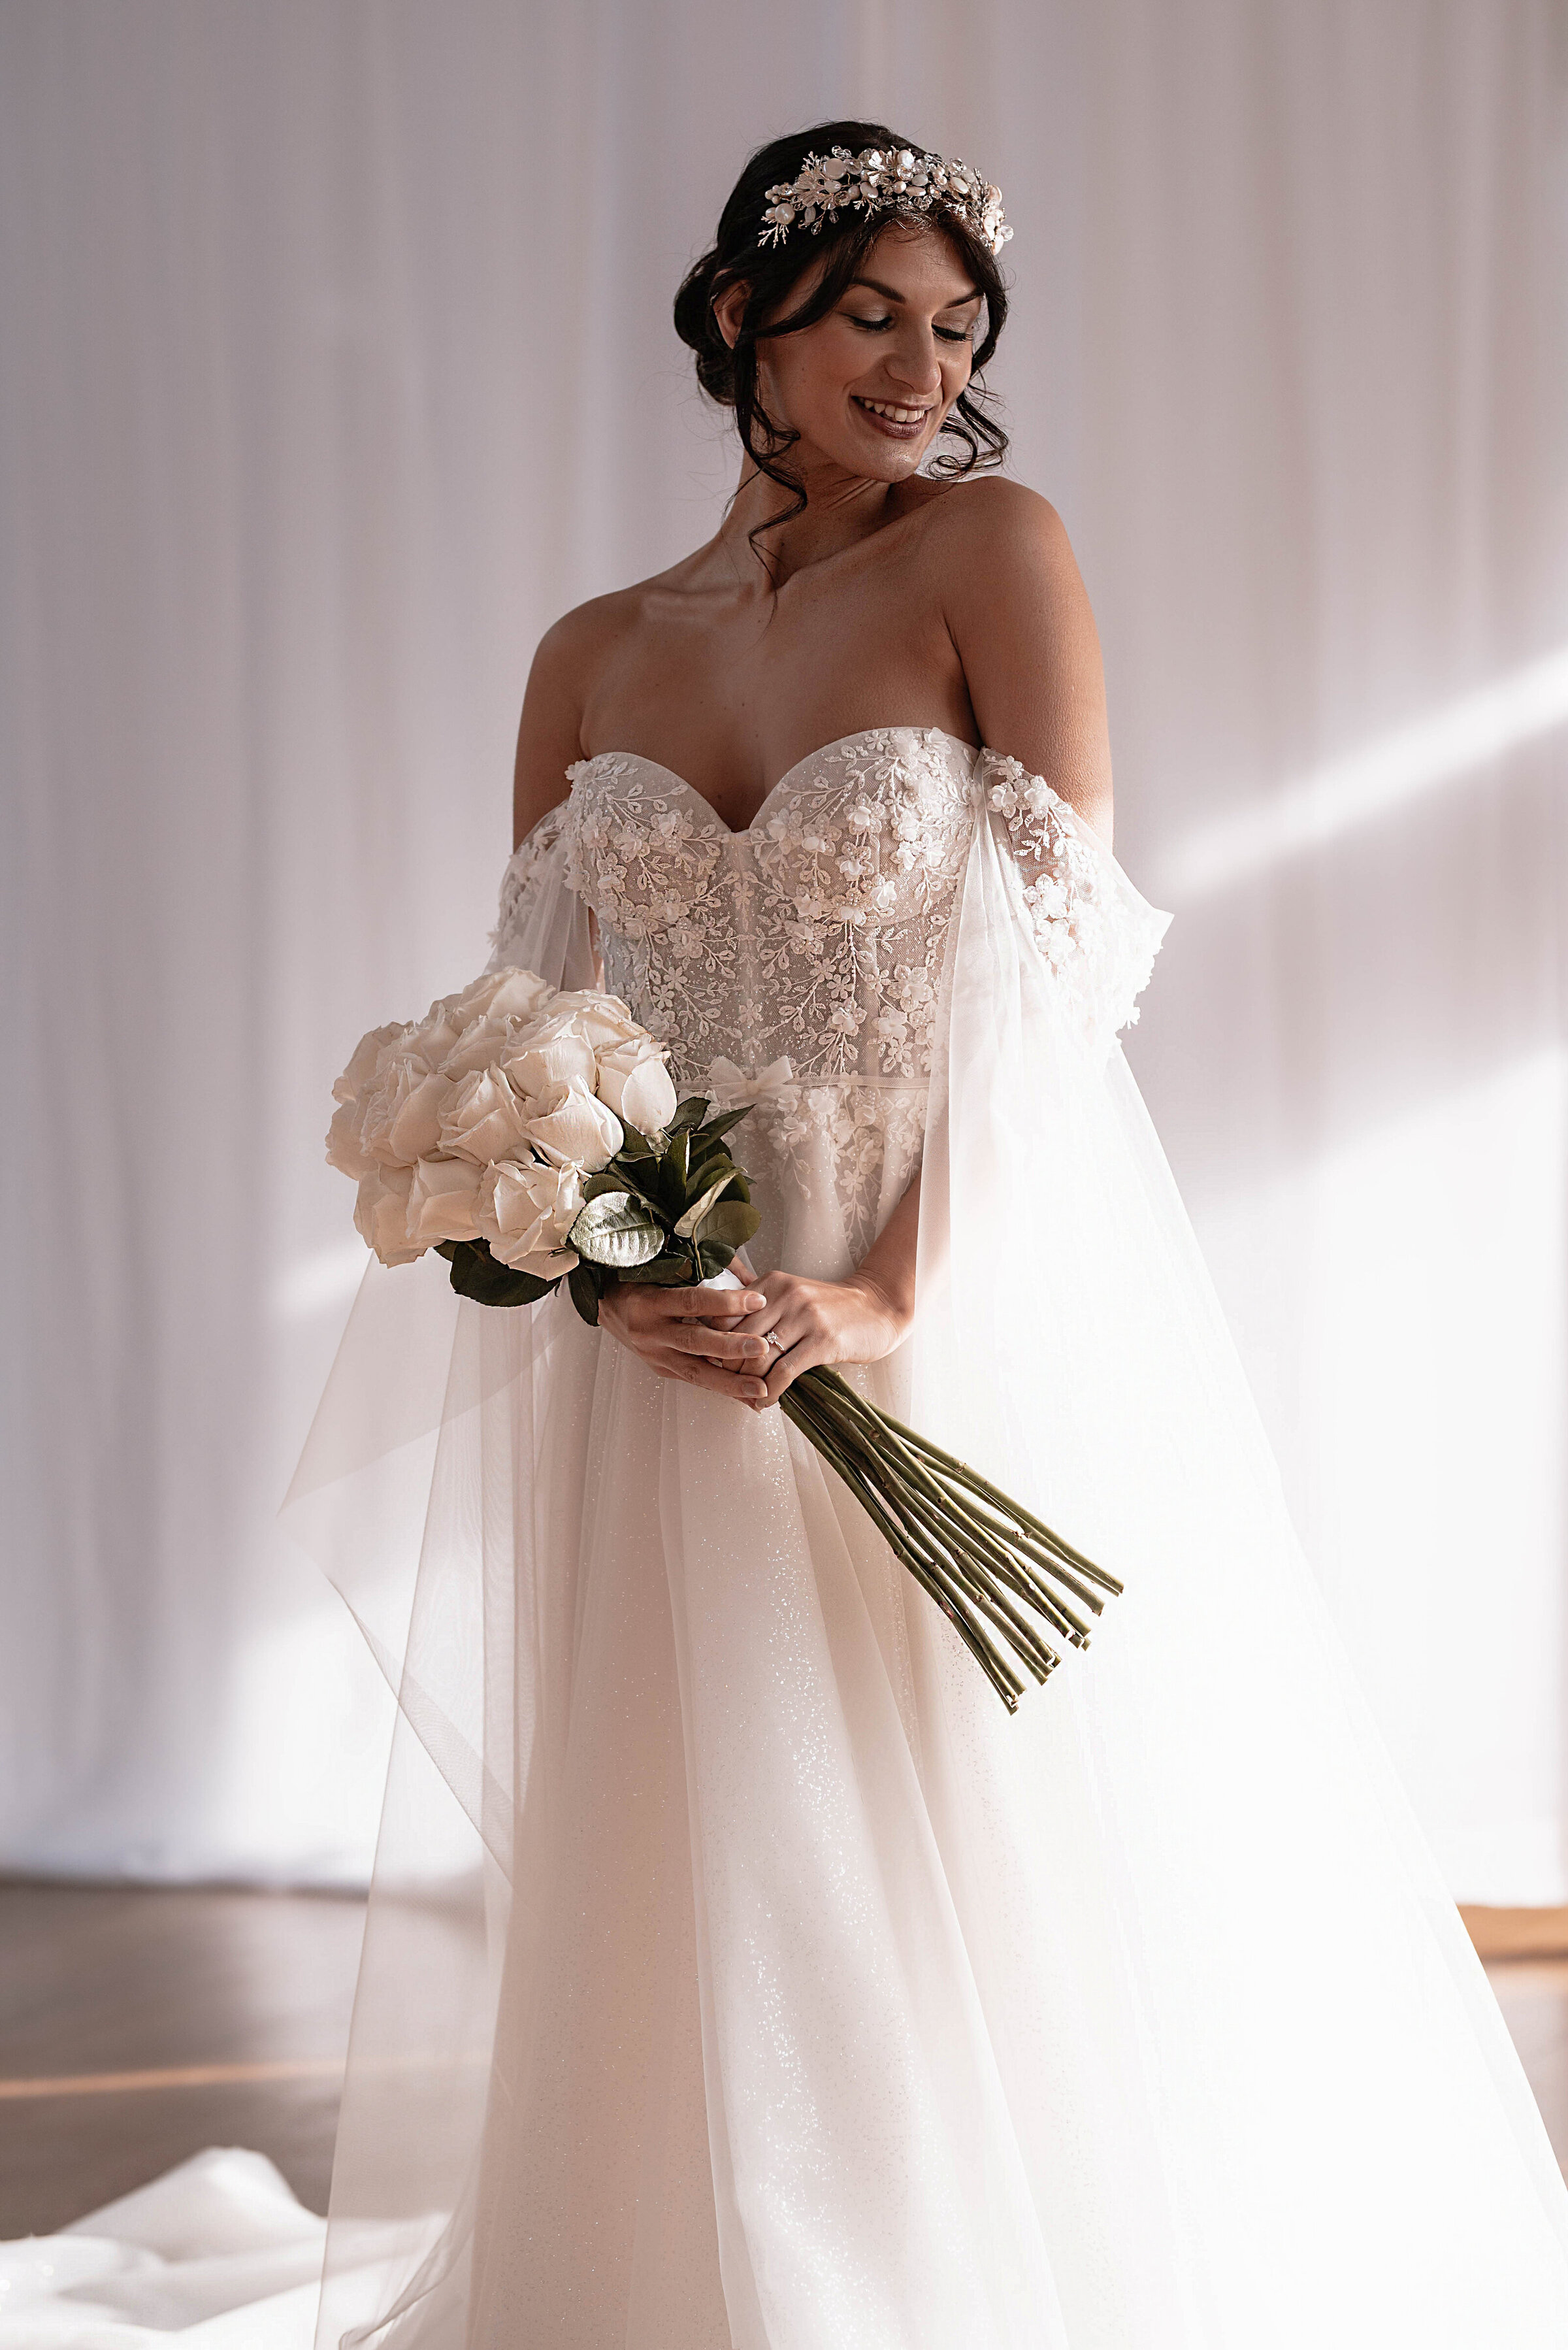 Bride in lace and sparkly wedding dress smiling and holding bouquet of white roses